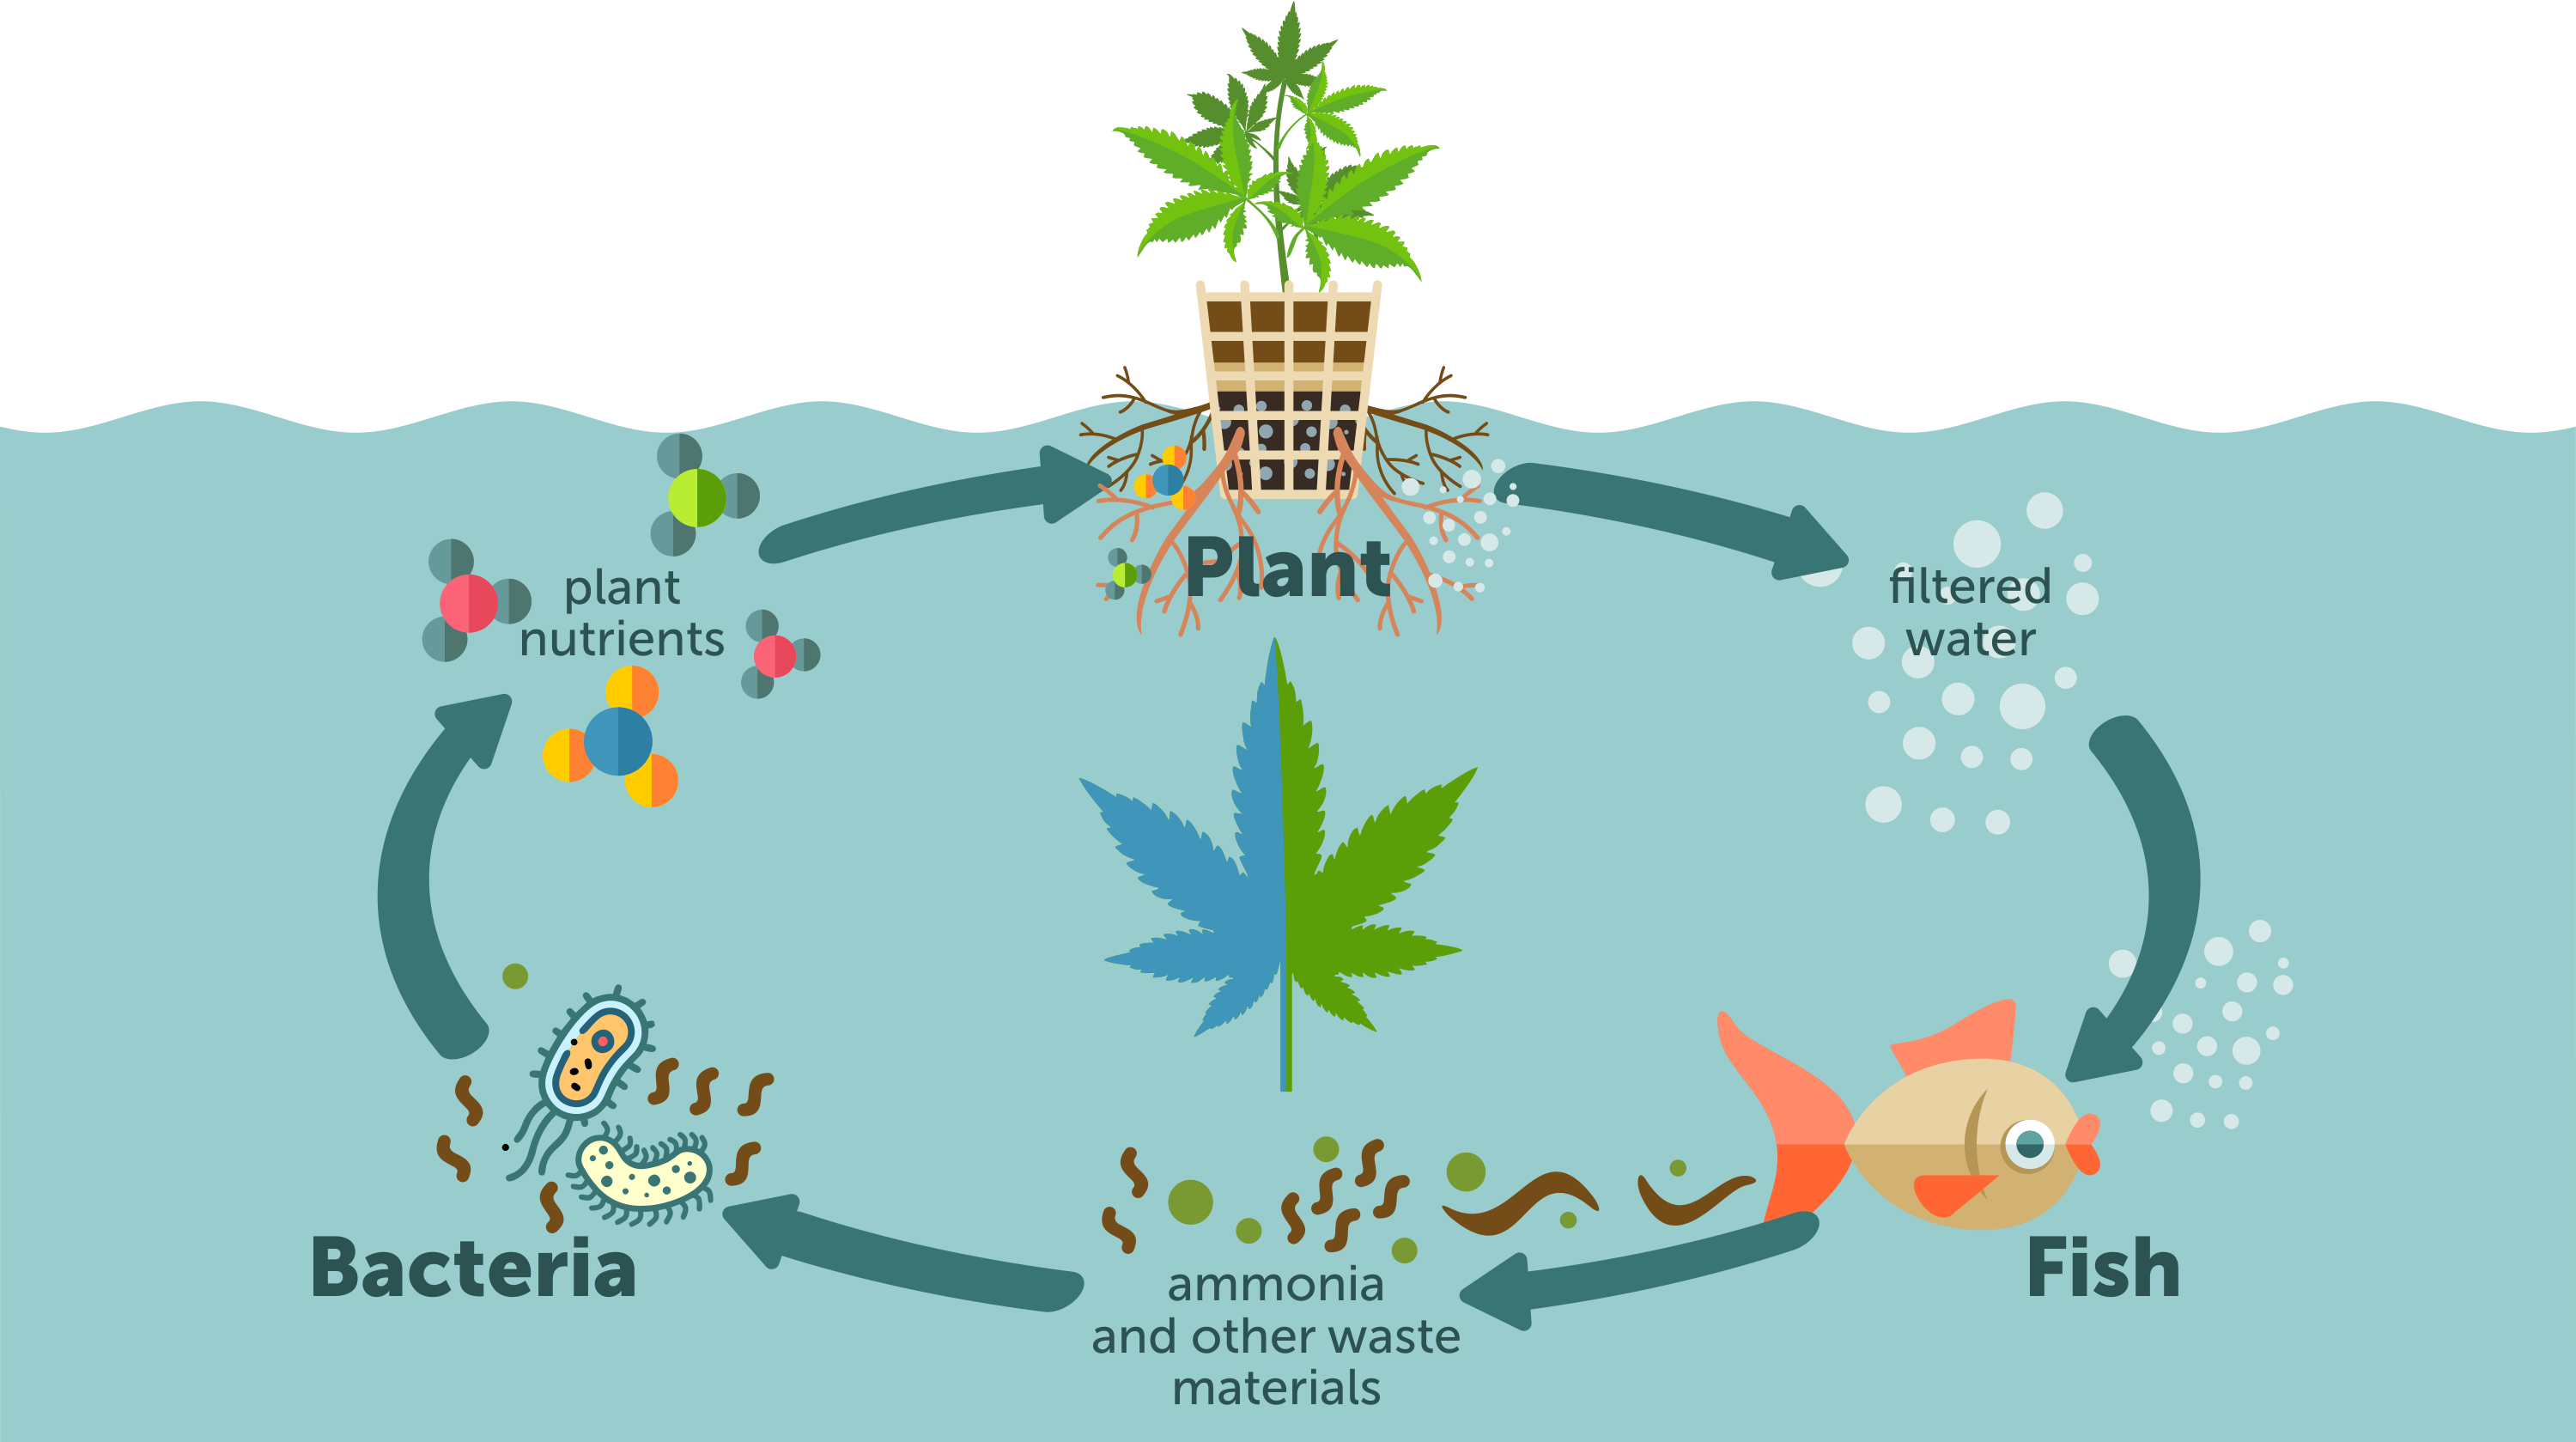 Life Cycle Of a Cannabis Aquaponics System